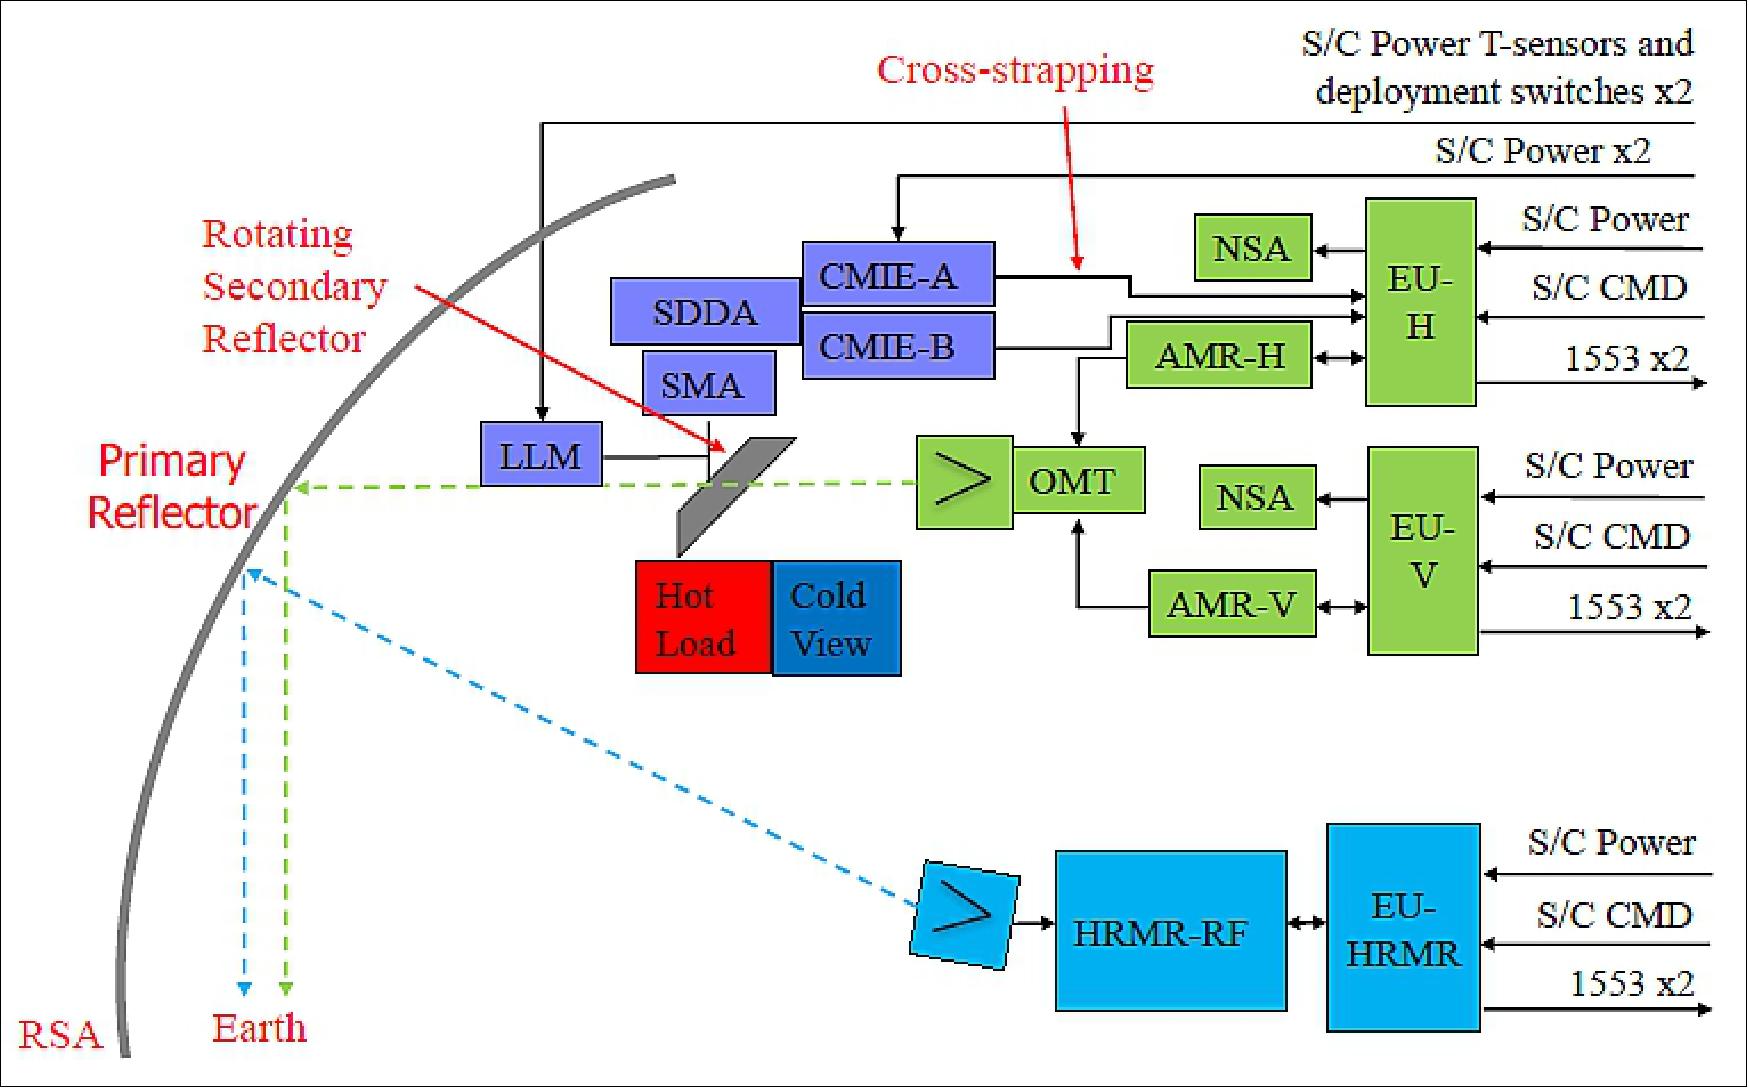 Figure 37: AMR-C block diagram. Each subsystem is color-coded (with its EU unit), image credit: NASA/JPL